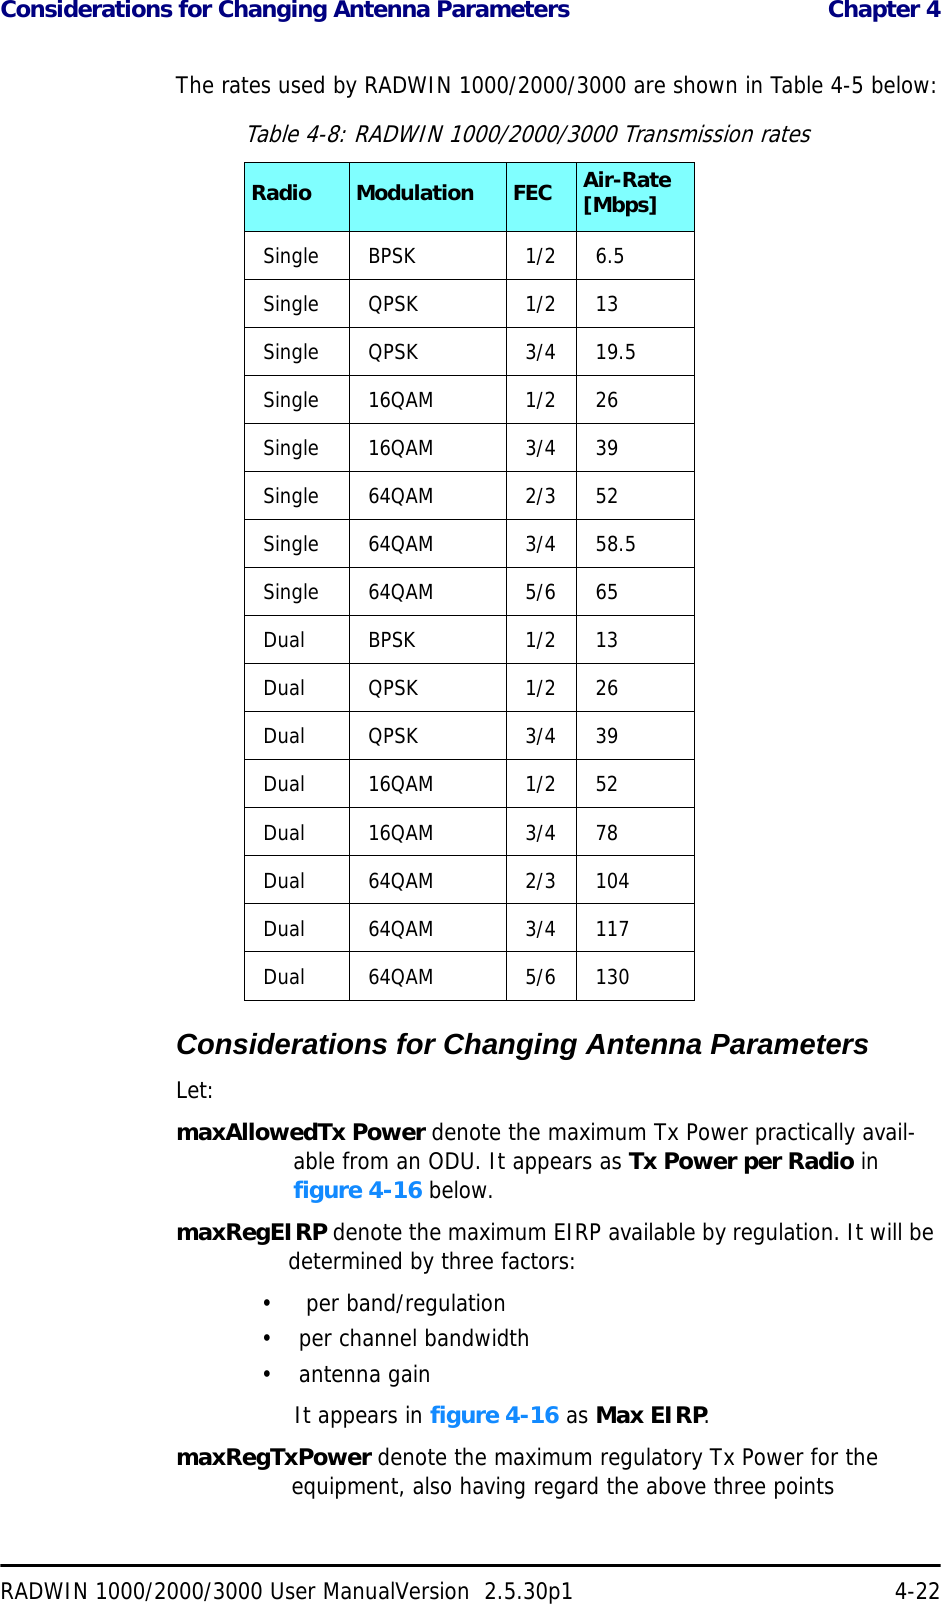 Considerations for Changing Antenna Parameters  Chapter 4RADWIN 1000/2000/3000 User ManualVersion  2.5.30p1 4-22The rates used by RADWIN 1000/2000/3000 are shown in Table 4-5 below:Considerations for Changing Antenna ParametersLet:maxAllowedTx Power denote the maximum Tx Power practically avail-able from an ODU. It appears as Tx Power per Radio in figure 4-16 below.maxRegEIRP denote the maximum EIRP available by regulation. It will be determined by three factors:•  per band/regulation• per channel bandwidth•antenna gainIt appears in figure 4-16 as Max EIRP.maxRegTxPower denote the maximum regulatory Tx Power for the equipment, also having regard the above three pointsTable 4-8: RADWIN 1000/2000/3000 Transmission ratesRadio Modulation FEC Air-Rate [Mbps]Single BPSK 1/2 6.5Single QPSK 1/2 13Single QPSK 3/4 19.5Single 16QAM 1/2 26Single 16QAM 3/4 39Single 64QAM 2/3 52Single 64QAM 3/4 58.5Single 64QAM 5/6 65Dual BPSK 1/2 13Dual QPSK 1/2 26Dual QPSK 3/4 39Dual 16QAM 1/2 52Dual 16QAM 3/4 78Dual 64QAM 2/3 104Dual 64QAM 3/4 117Dual 64QAM 5/6 130